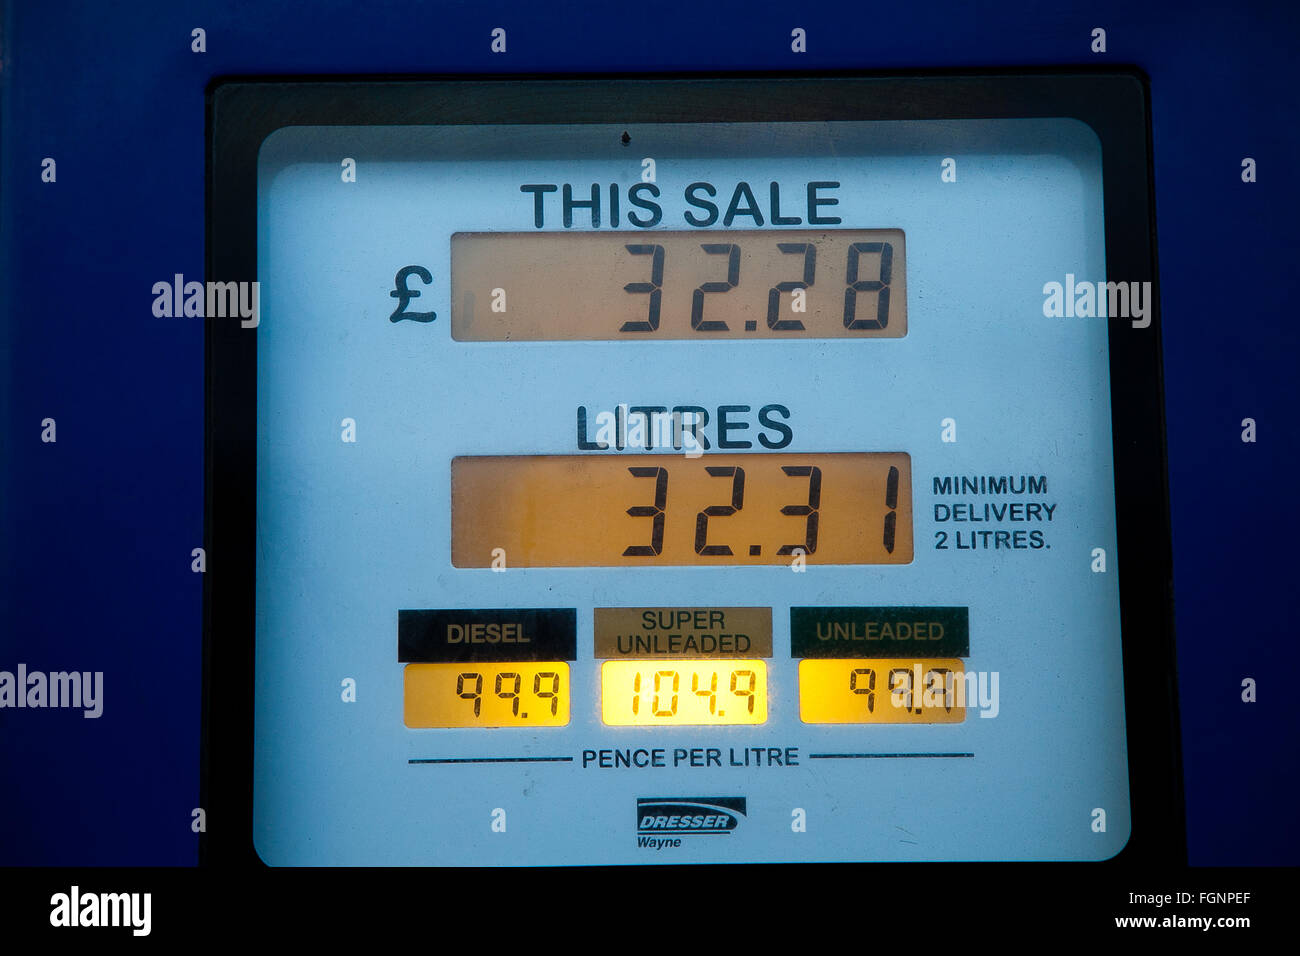 Supermarket giant, Sainsburys selling unleaded petrol and City diesel for less than £1 per litre Stock Photo